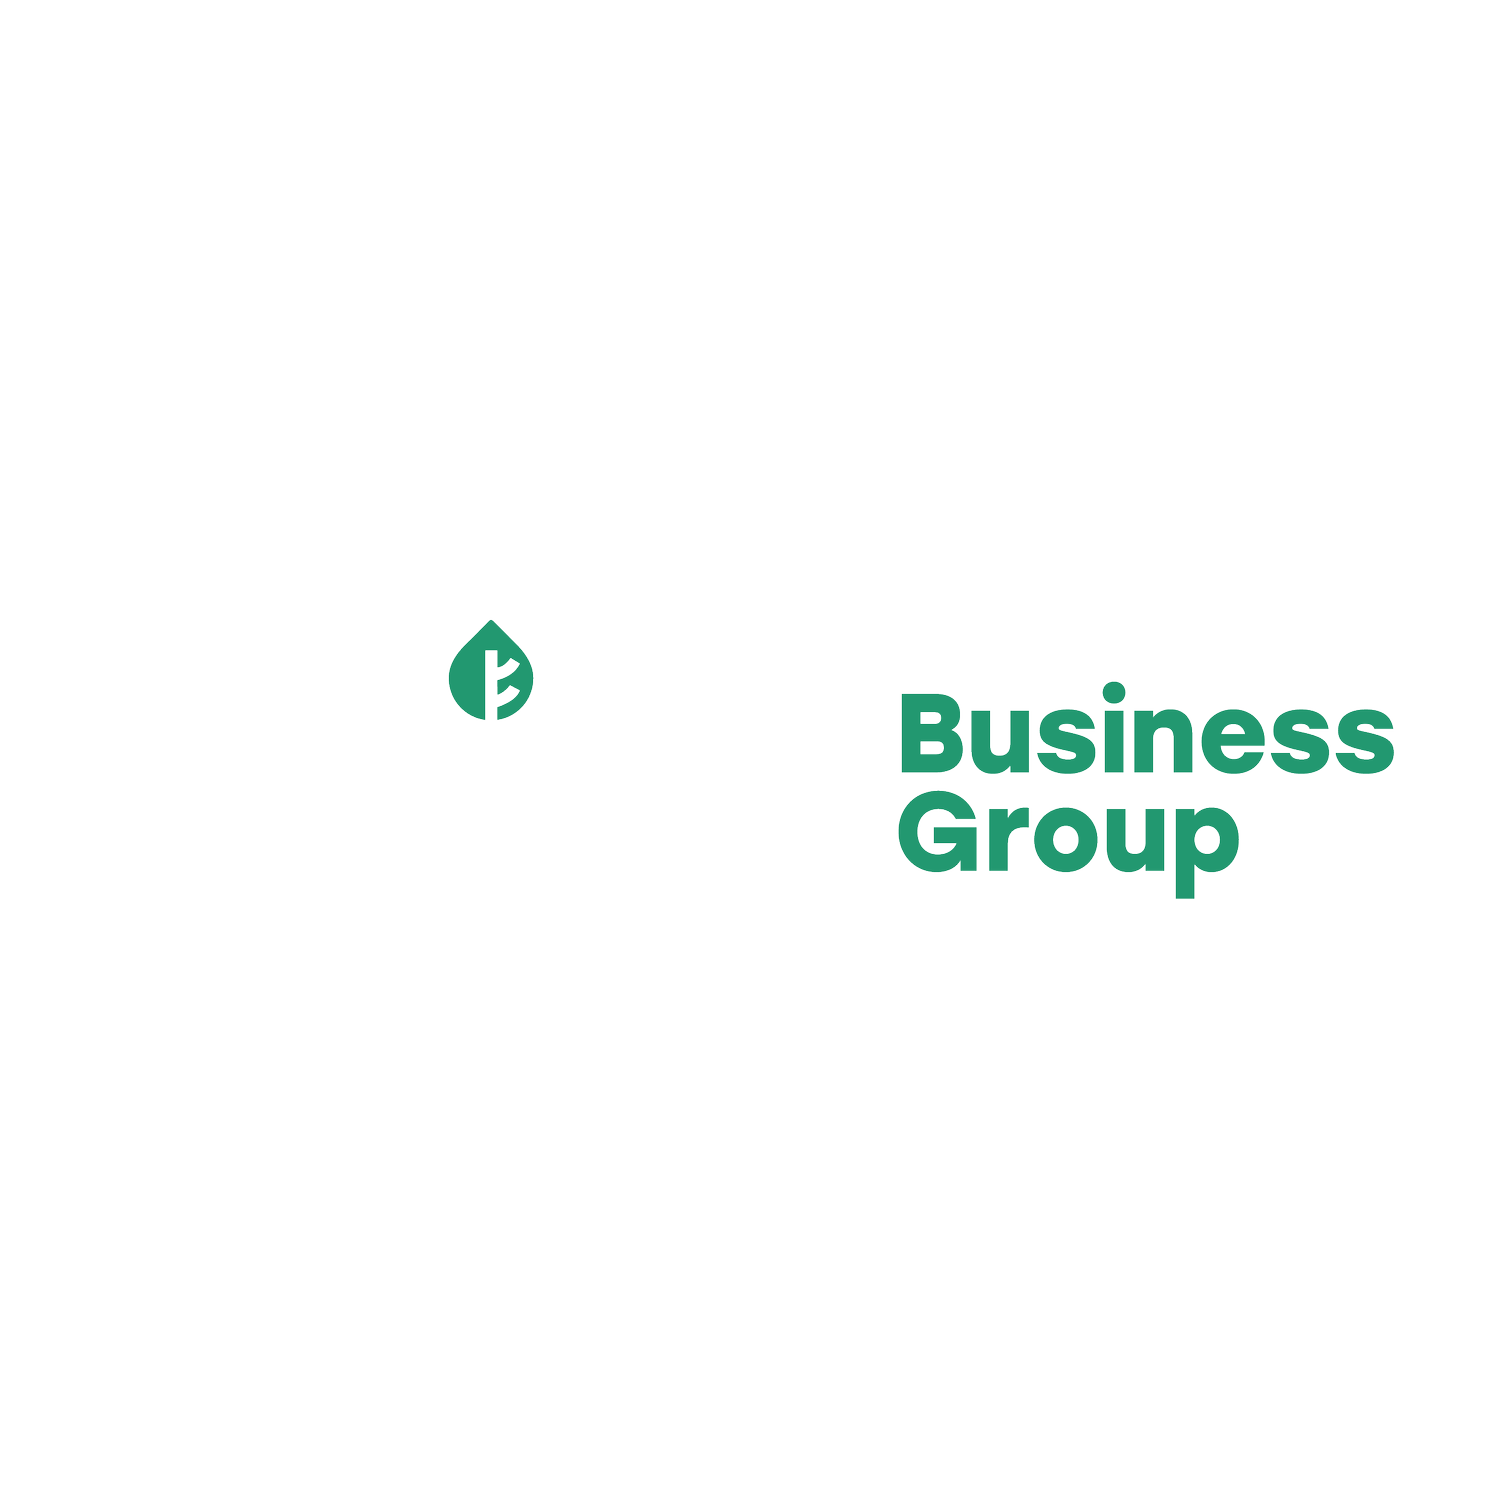 Ethical Business Group